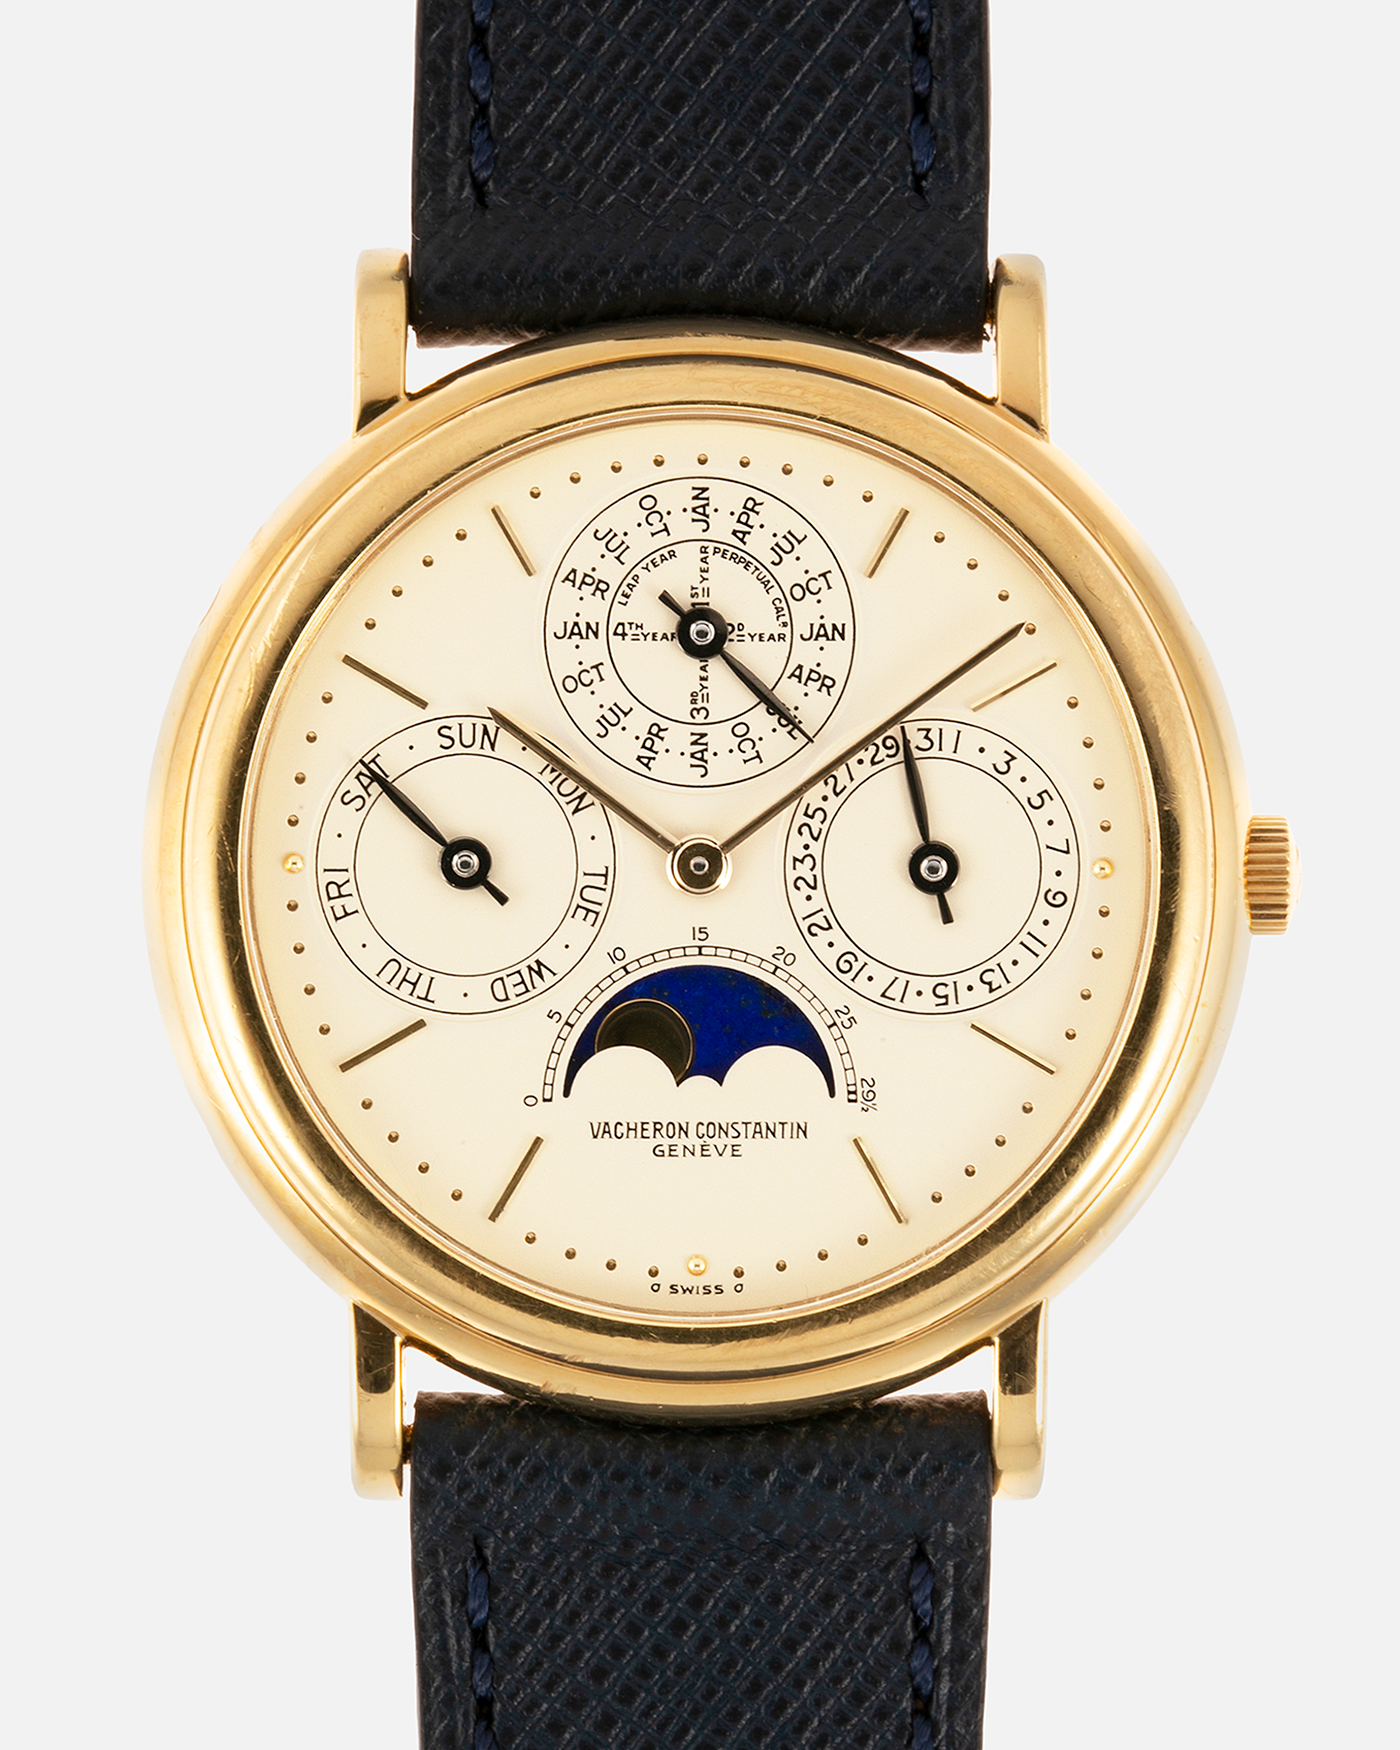 Brand: Vacheron Constantin Year: 1980’s / 1990’s Model: Perpetual Calendar Reference Number: 43031 Material: 18k Yellow Gold Movement: Vacheron Constantin Cal. 1120/2 Case Diameter: 36mm Bracelet: Molequin Navy Blue Texture Calf and Vacheron Constantin Brown Alligator with 18k Yellow Gold Tang Buckle